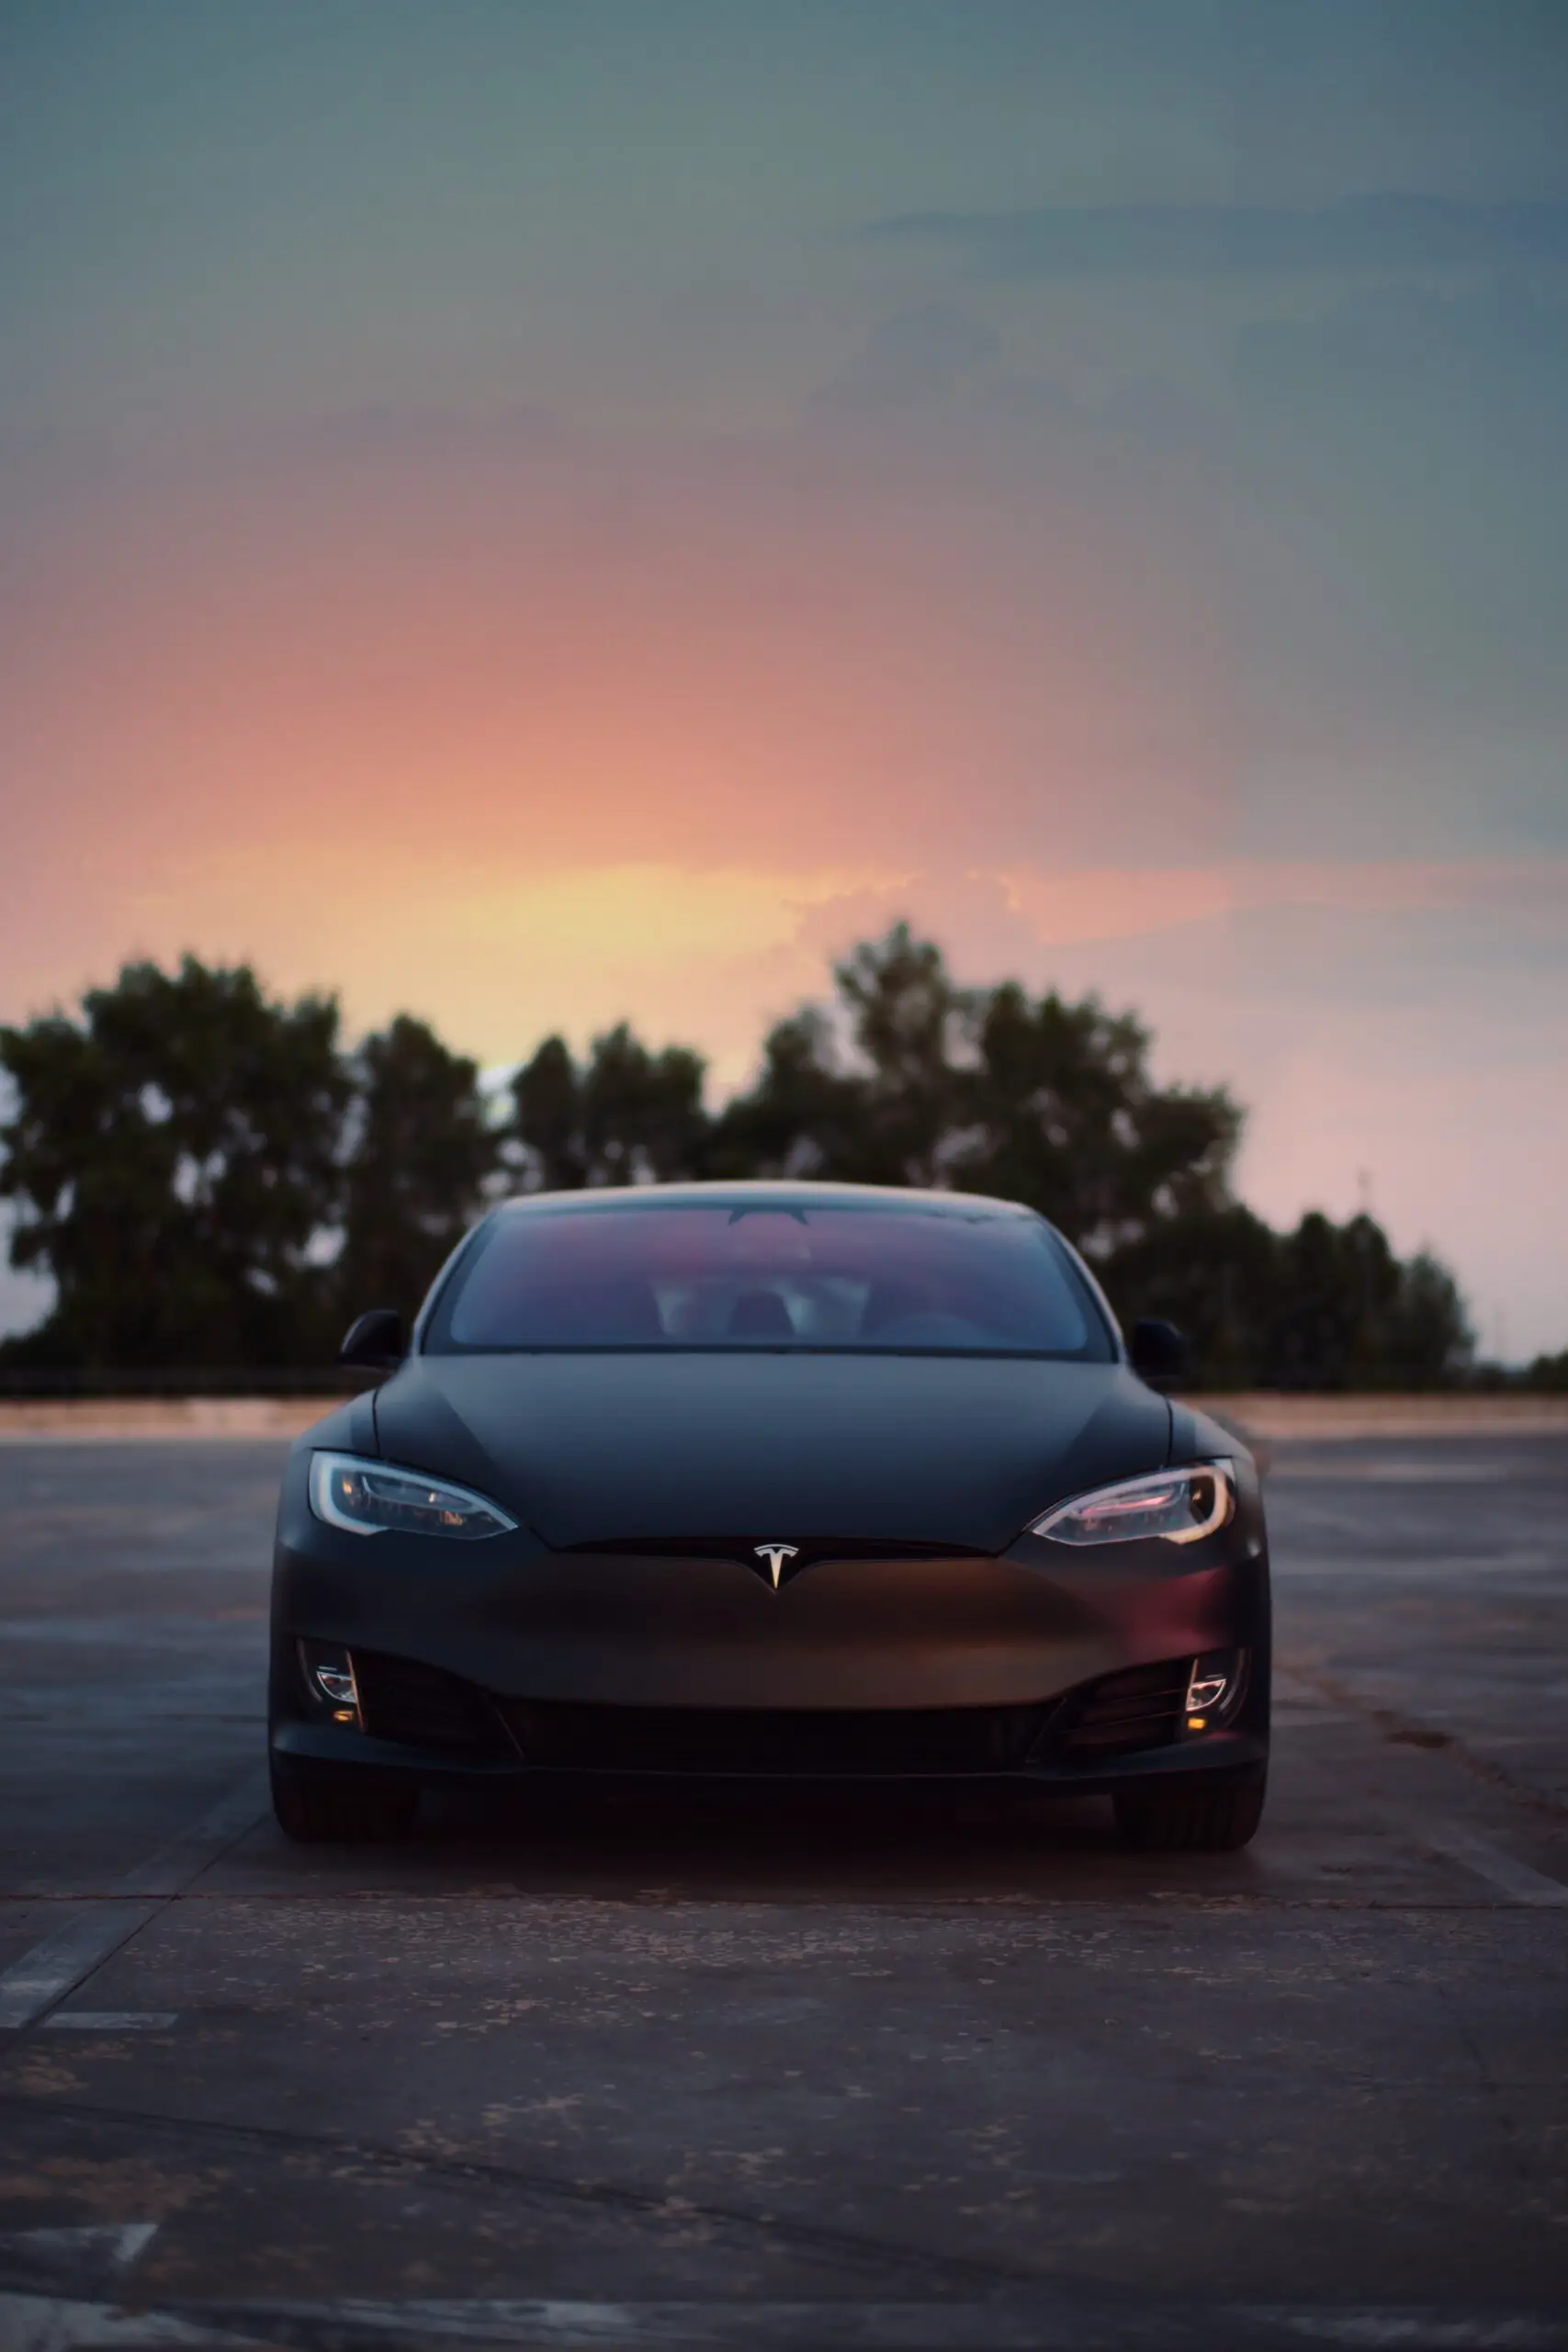 Can a Tesla go 0-60 in 3 seconds?